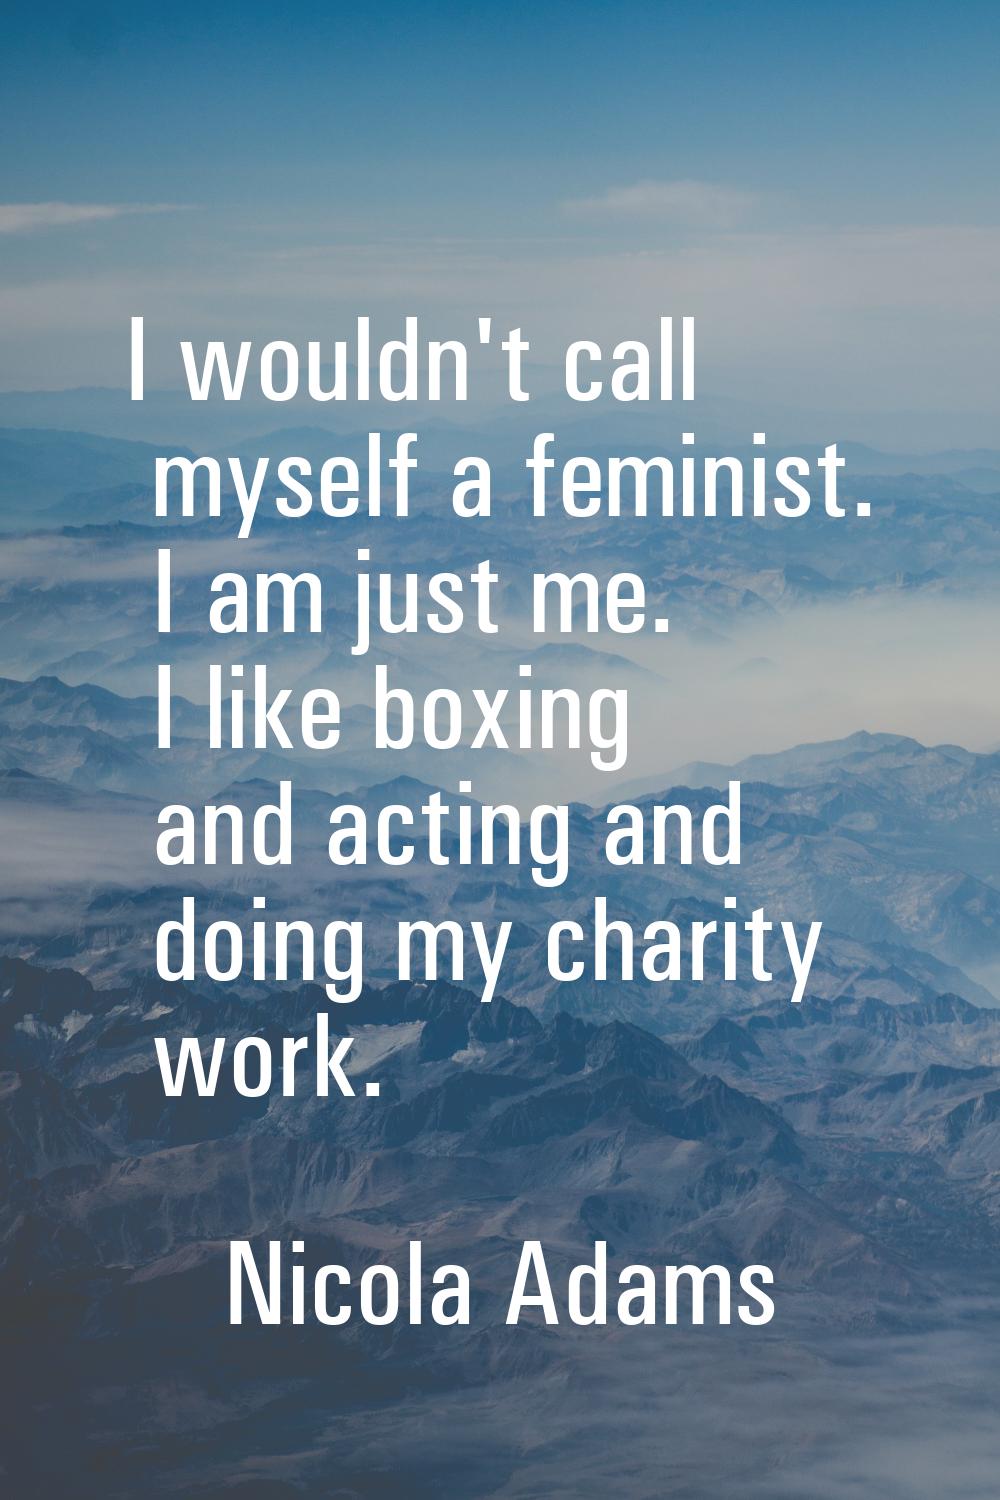 I wouldn't call myself a feminist. I am just me. I like boxing and acting and doing my charity work